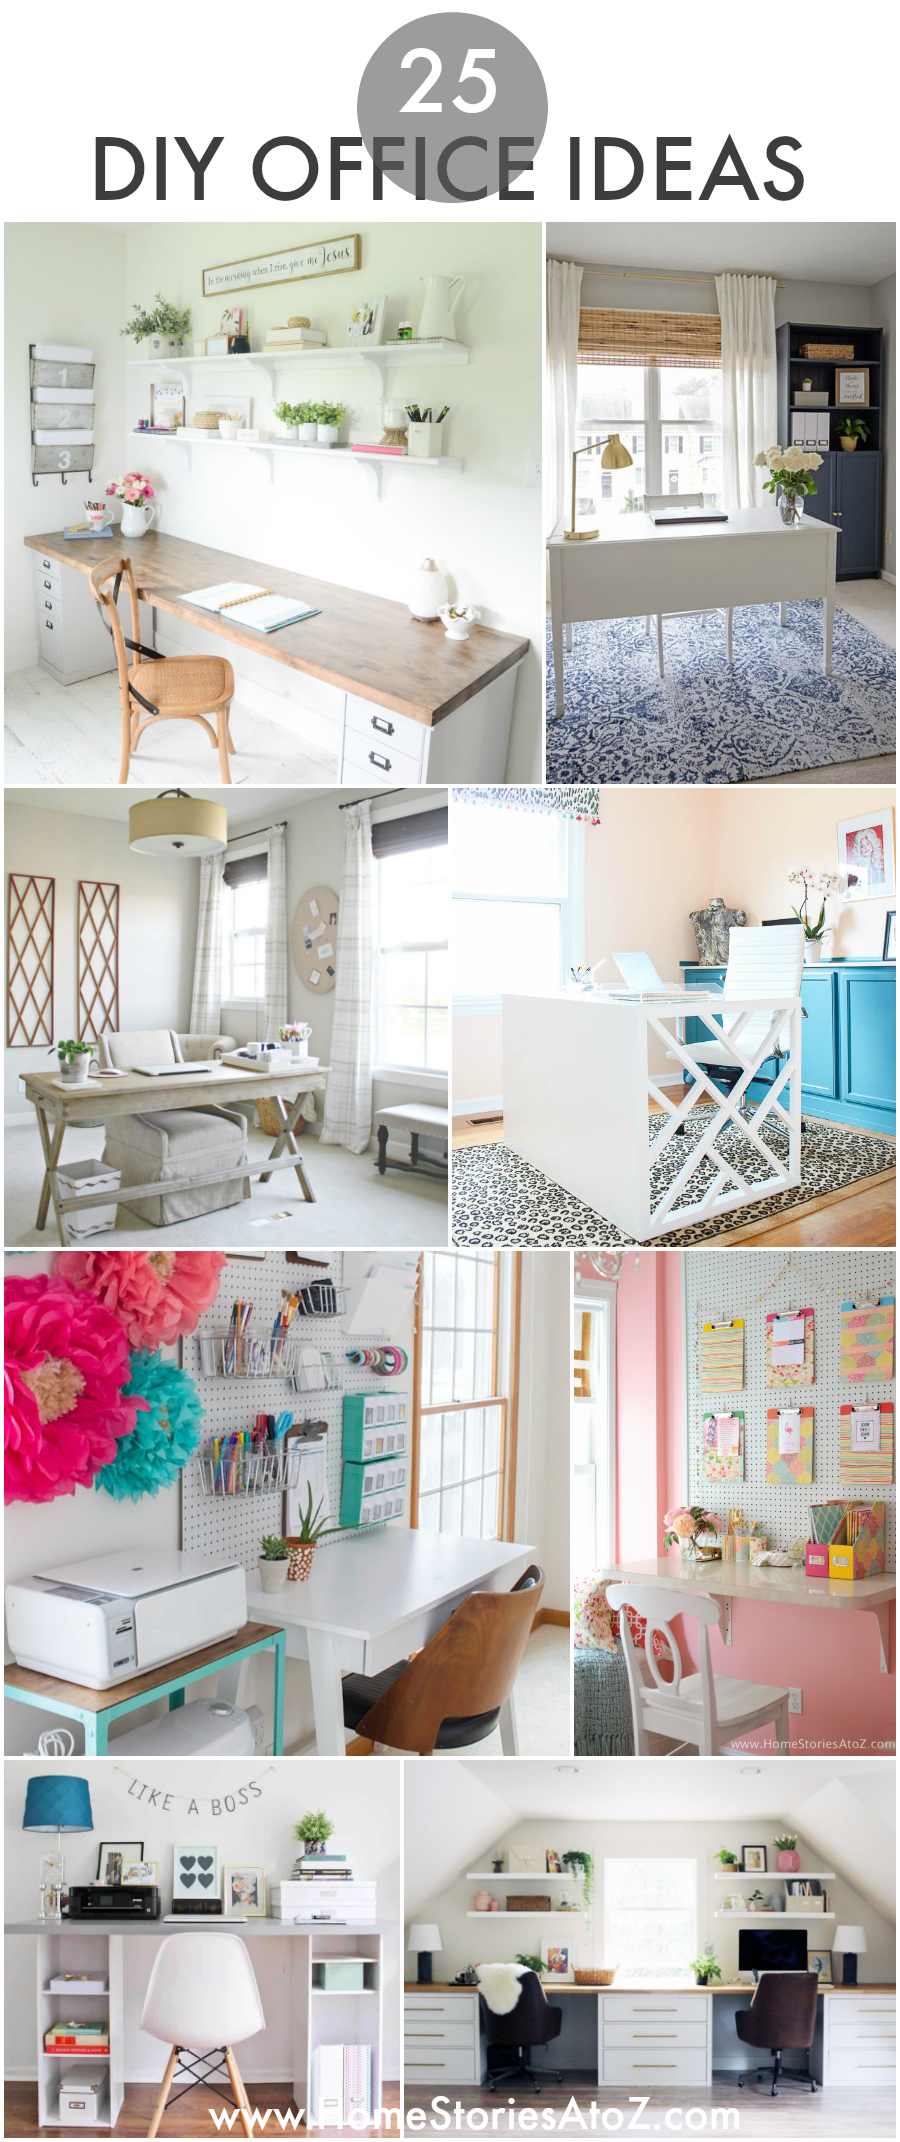 DIY Office Spaces: Tips for DIY Desk Ideas, Organization, and ...